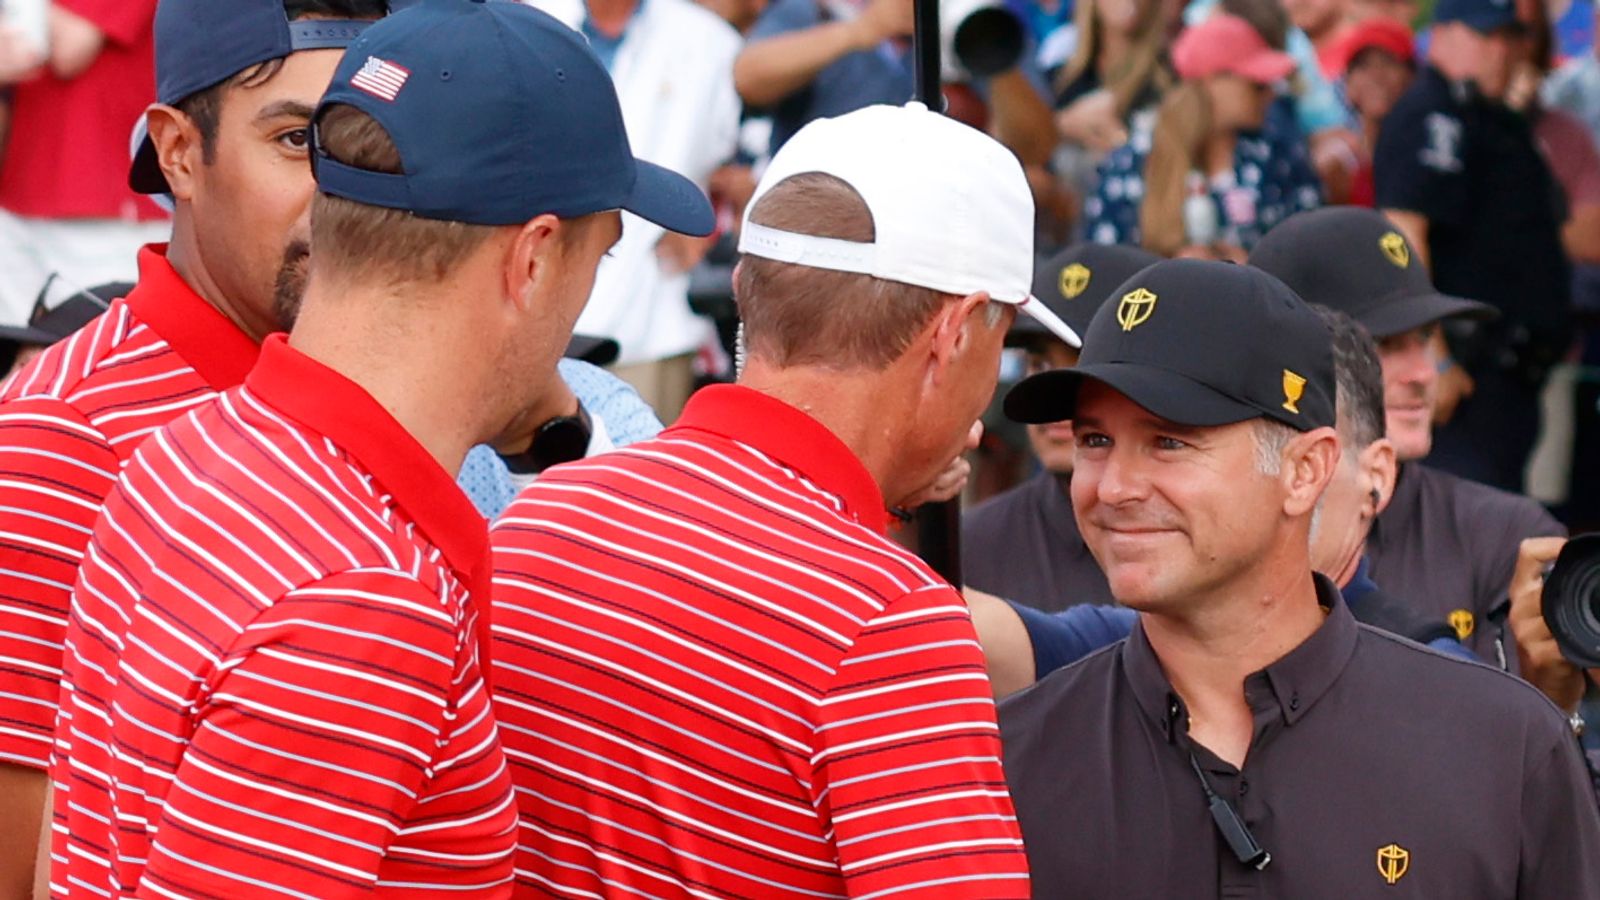 Presidents Cup 2022: A new era for the International Team? Key storylines from Team USA’s win